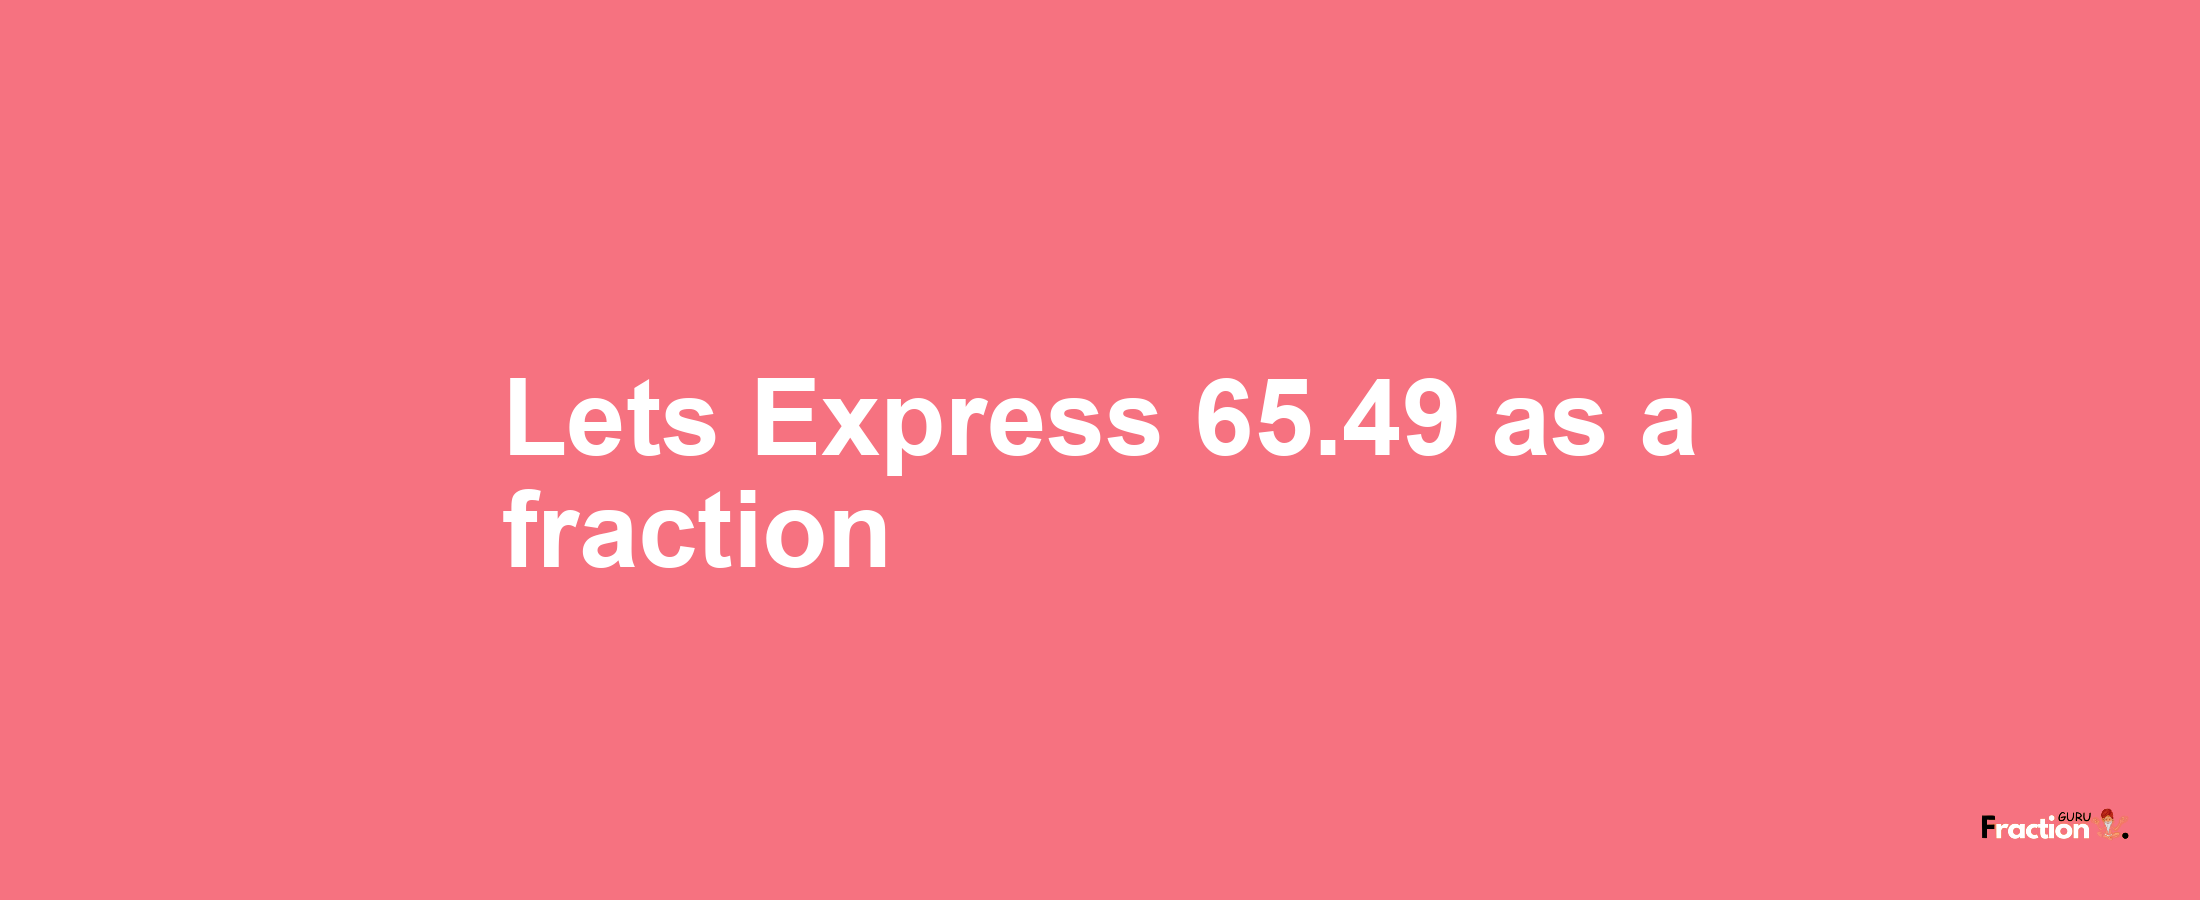 Lets Express 65.49 as afraction